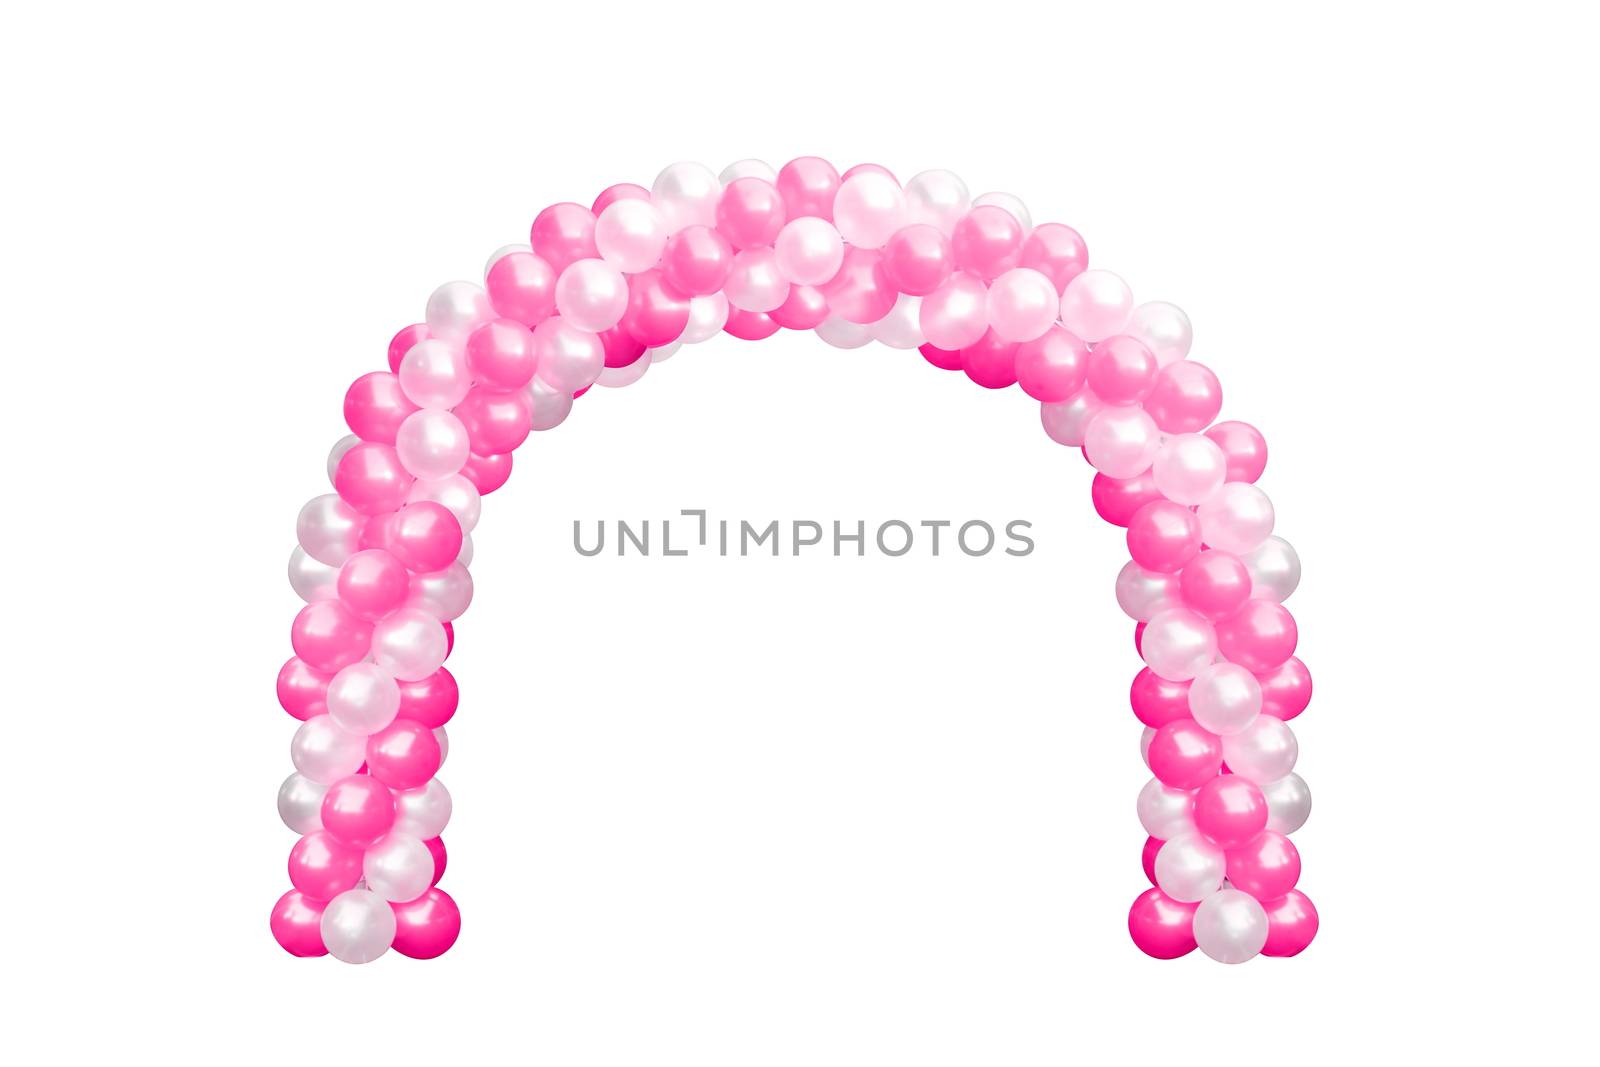 Balloon Archway door Pink and white, Arches wedding, Balloon Festival design decoration elements with arch floral design isolated on white Background by cgdeaw